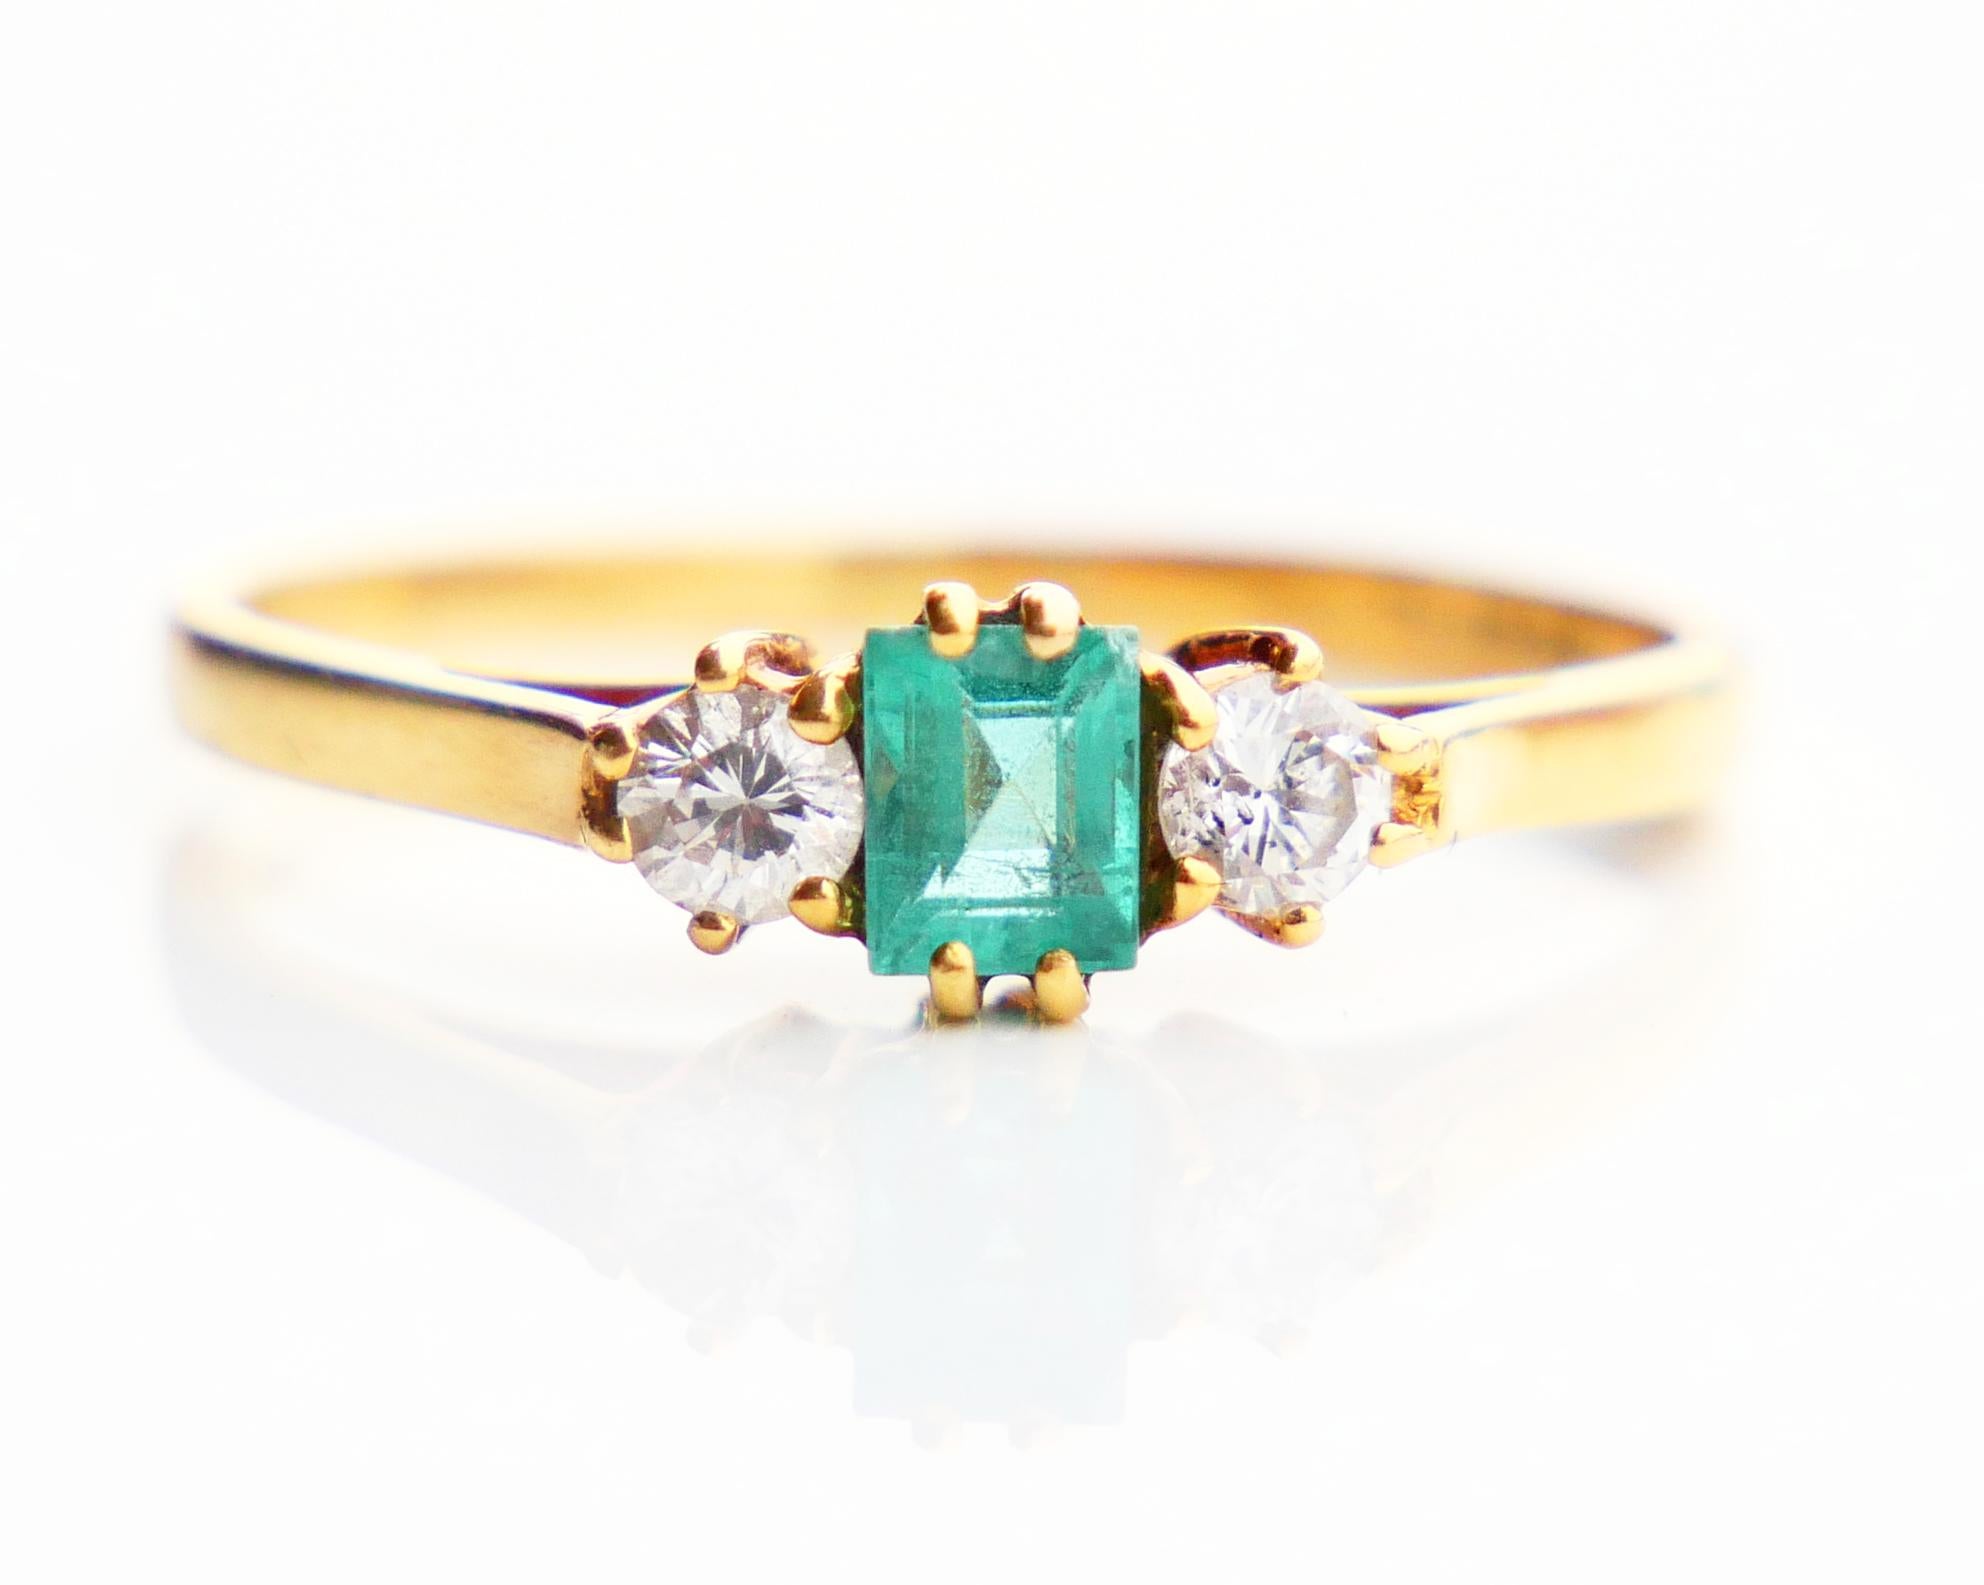 
Vintage 3 stones ring with plain band in solid 18K Yellow Gold.

Crown is 5 mm deep . Claw set natural Emerald cut 5.5 mm x 4 mm / ca. 05 ct flanked with two old diamond cut Diamonds in claws Ø 3.5 mm / 0.17 ct. each stone, color G,H /VS . Stones